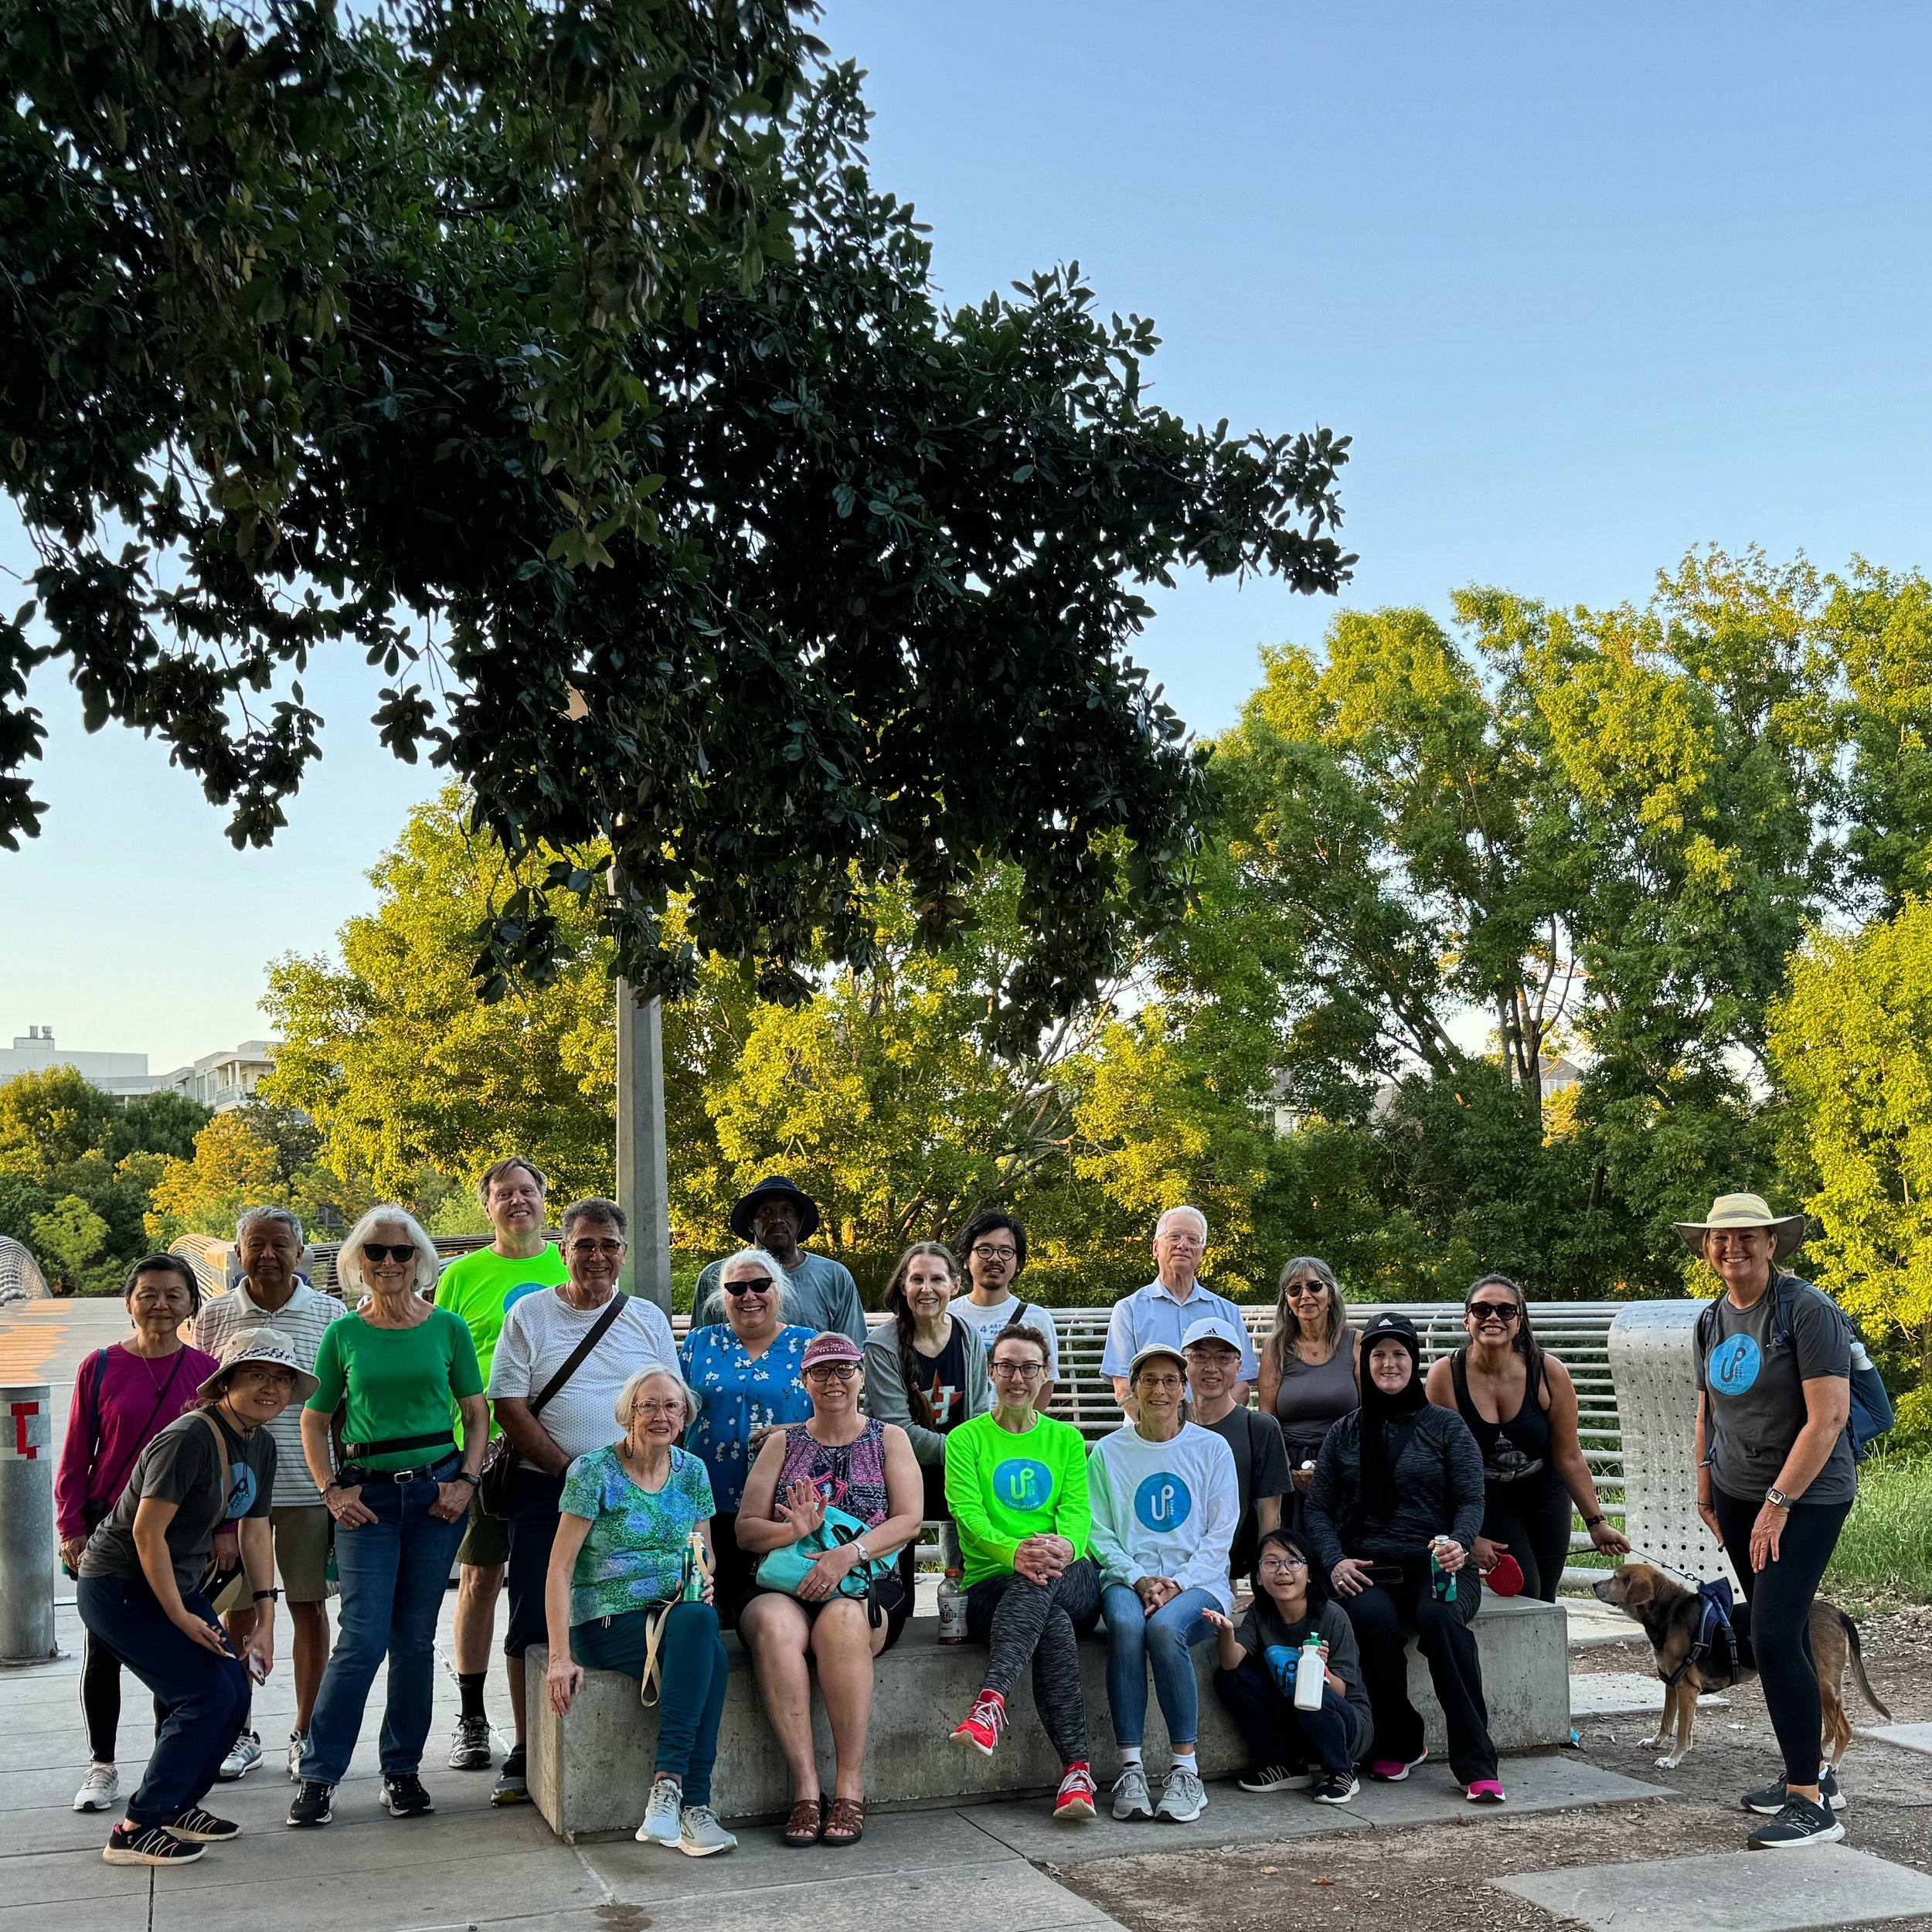 It Wellness Walk Wednesday at Buffalo Bayou Park! Nature. Movement. Connection.  Join UP next week and see for yourself the profound benefits of a walk in the park. 
@buffalobayou #GoWalkYourself